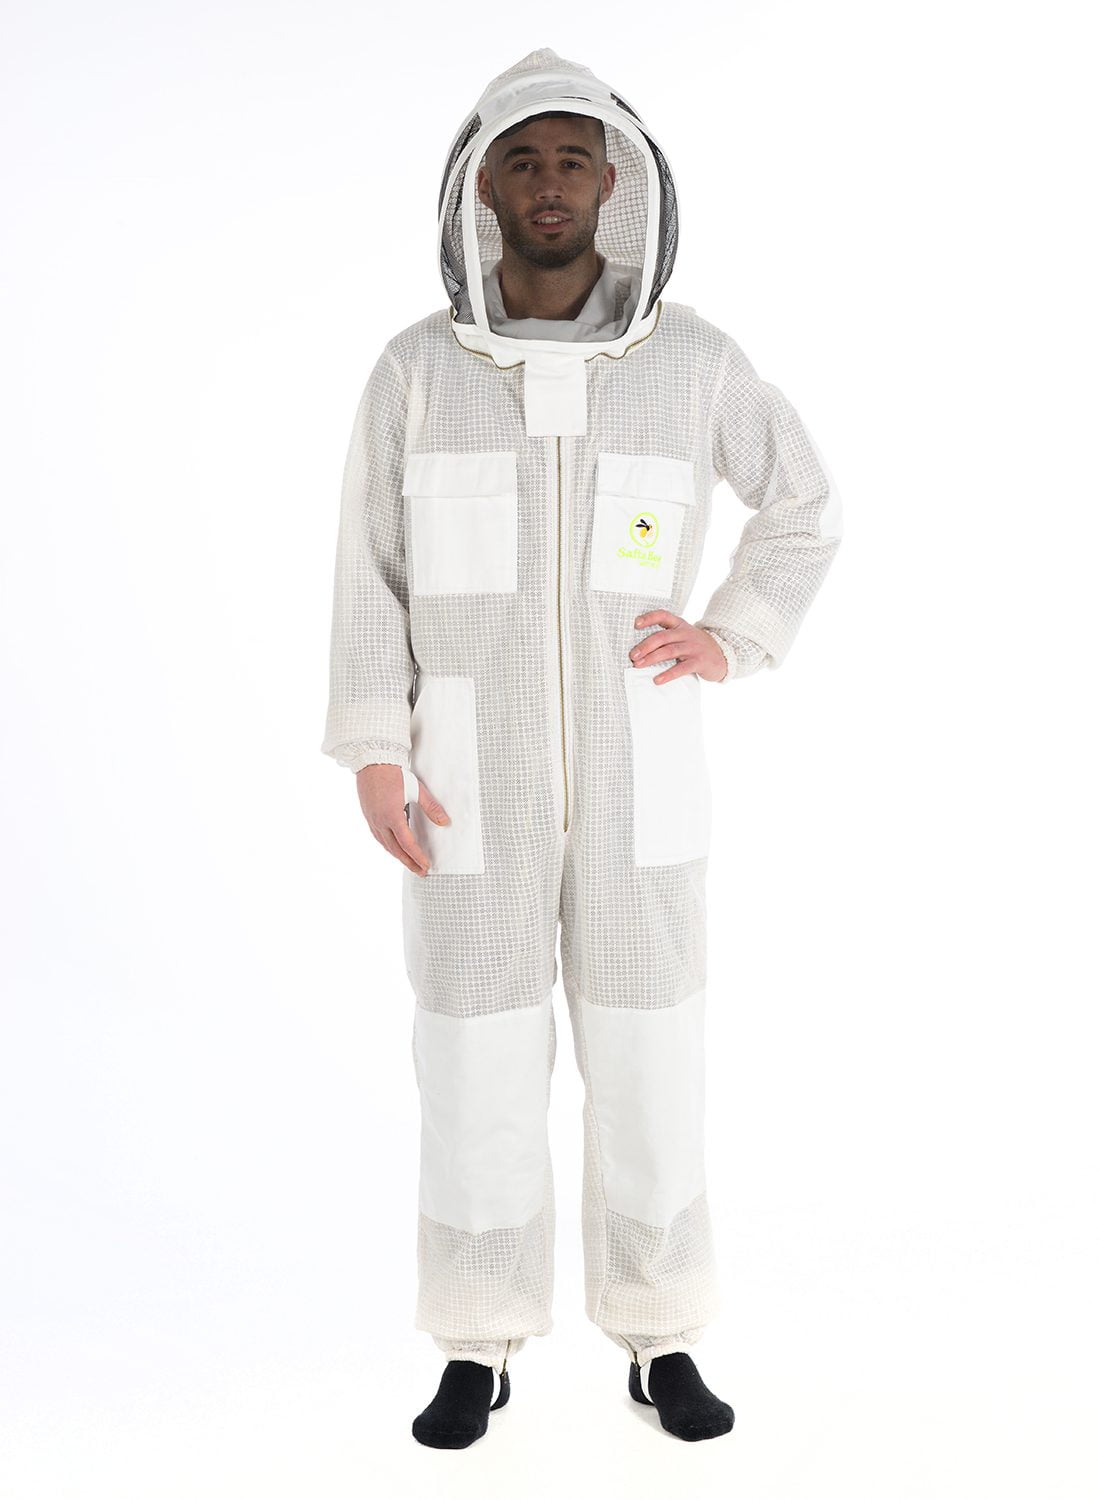 L Details about   Pilot Beekeeping Suit Ultra Ventilated 3 Layers Extra Ordinary Features Size 